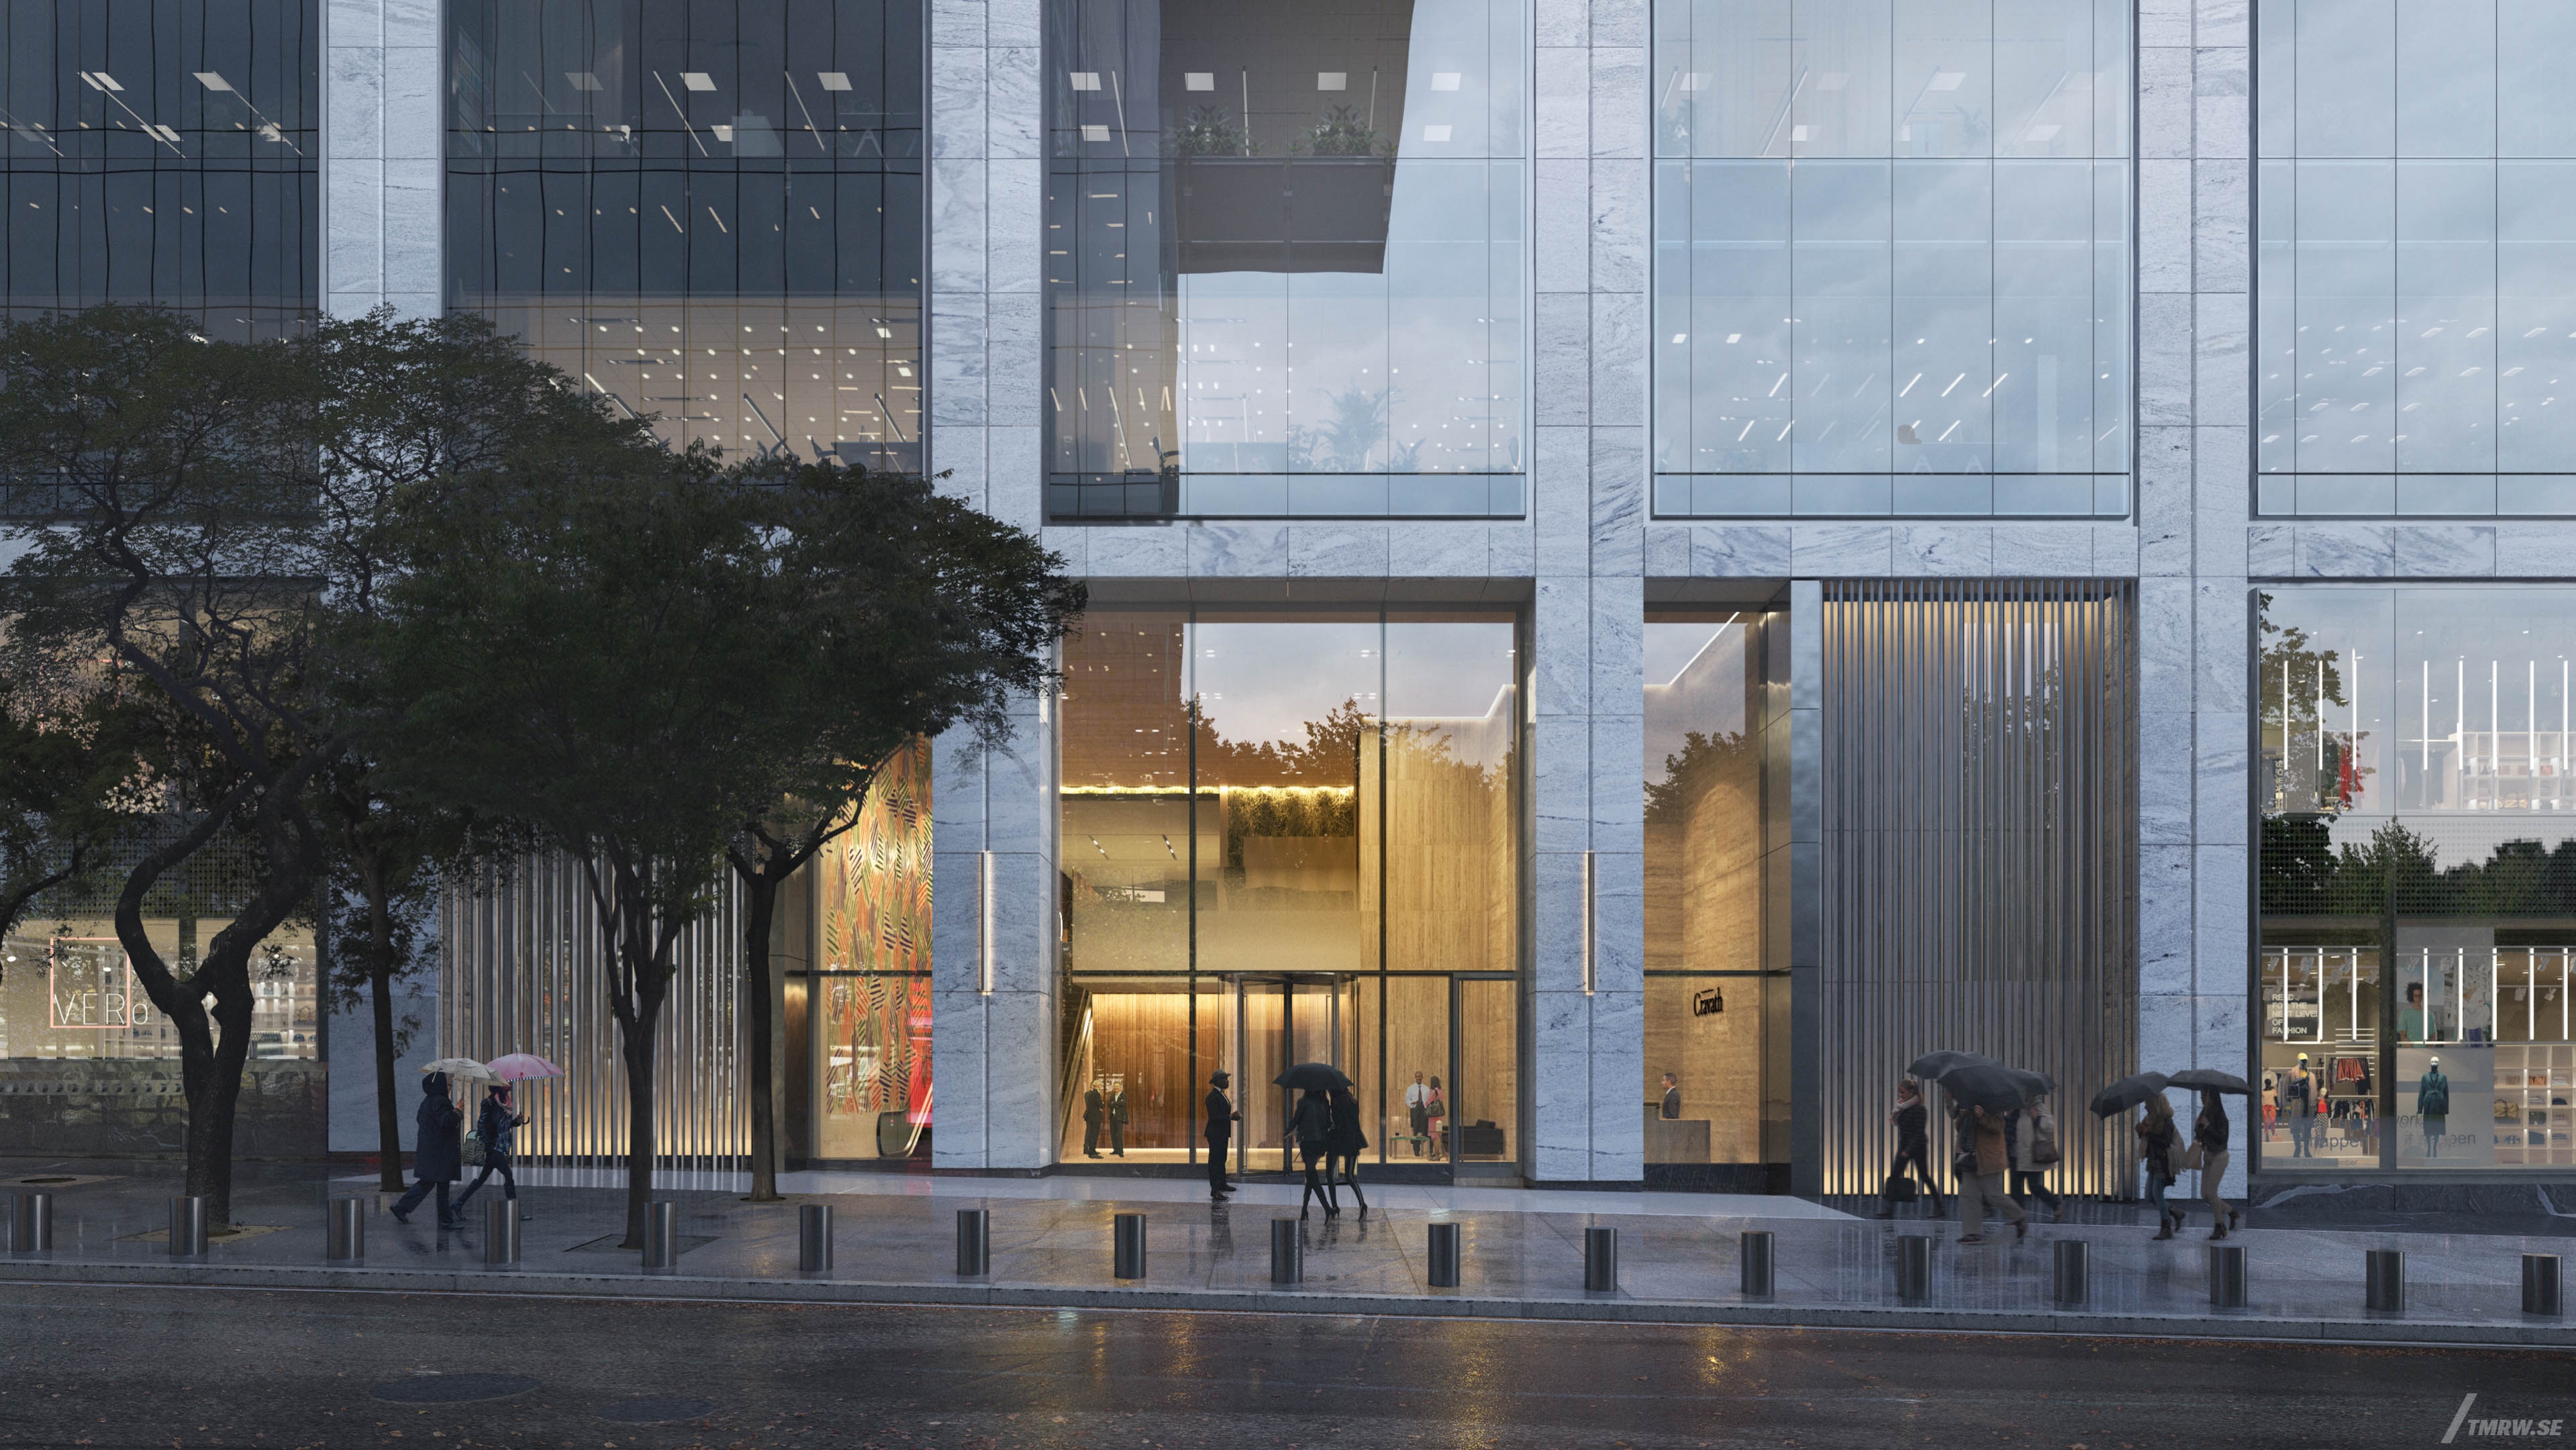 Architectural visualization of 50 Hudson Yards for Foster & Partners, a office in dusk light from a street view.